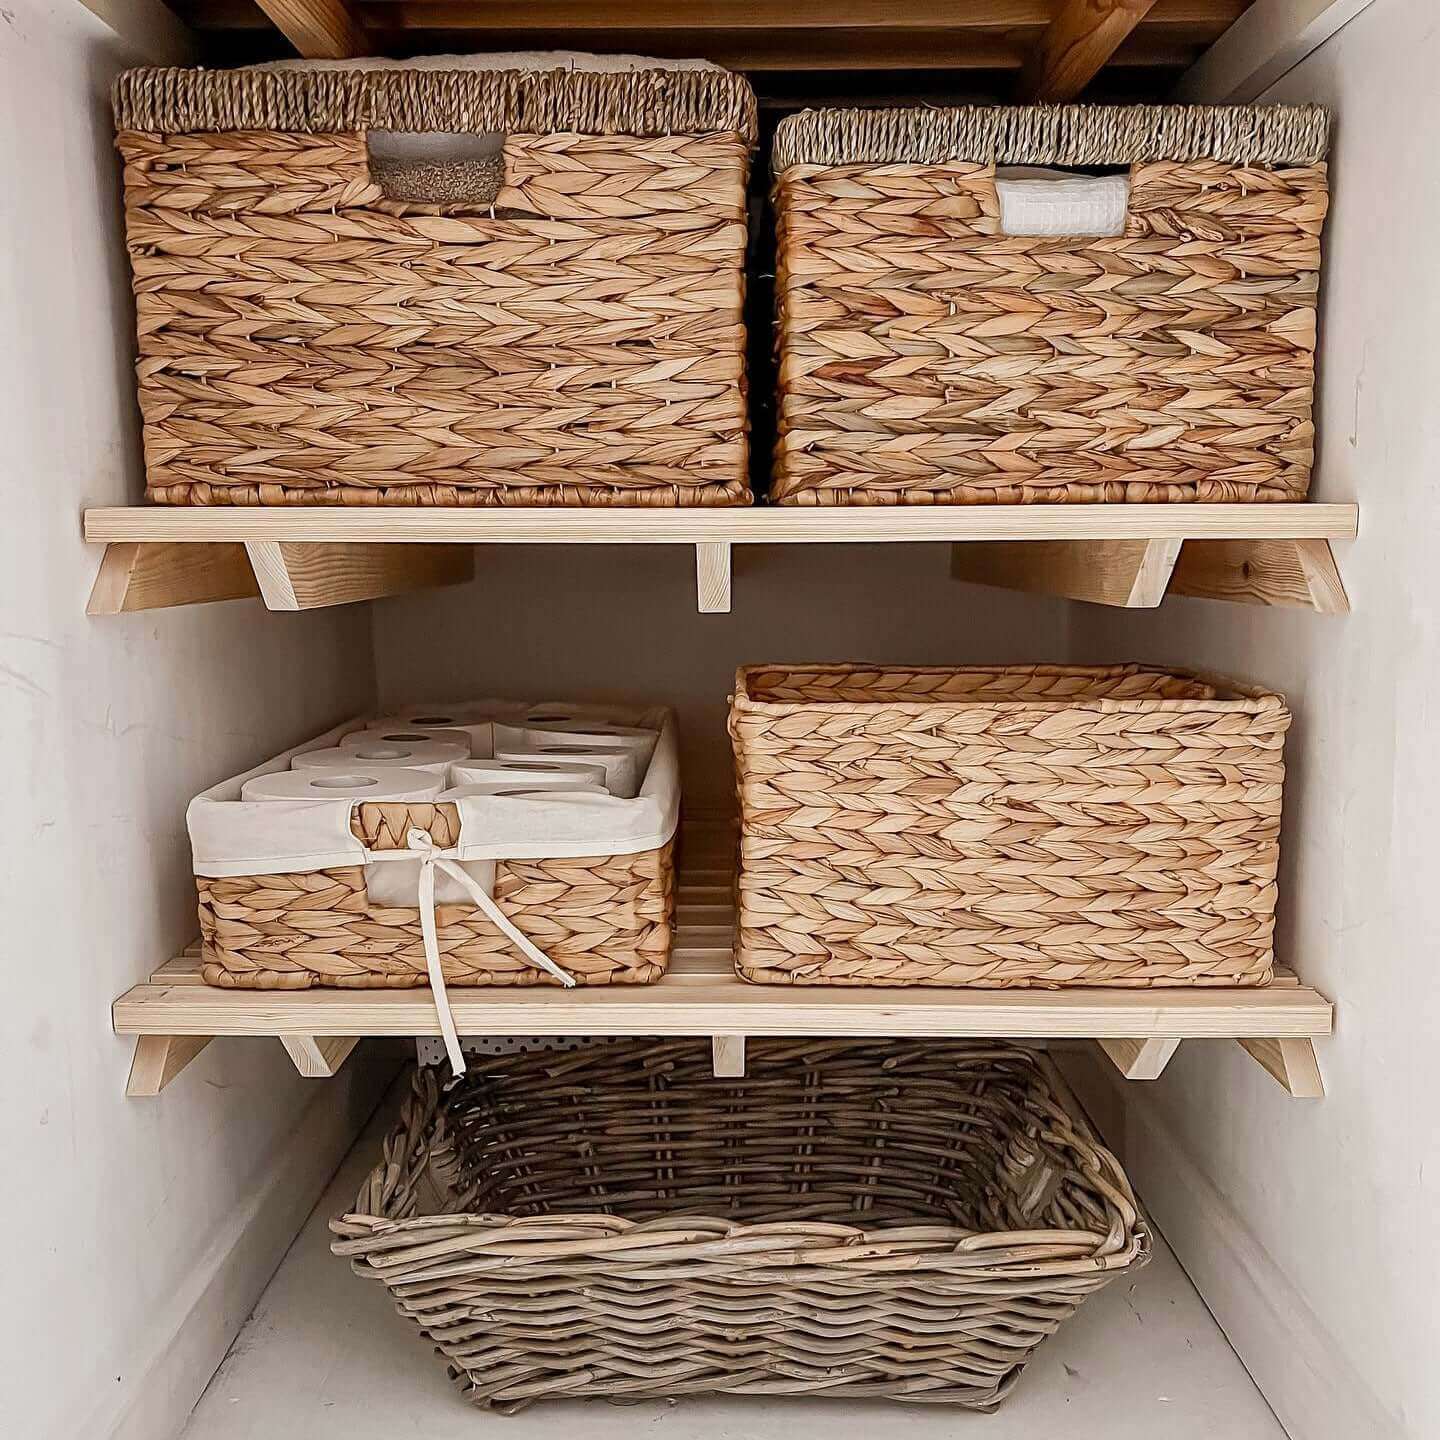 Airing Cupboard Wooden Slatted Shelves - 30 cm by 32.5 cm